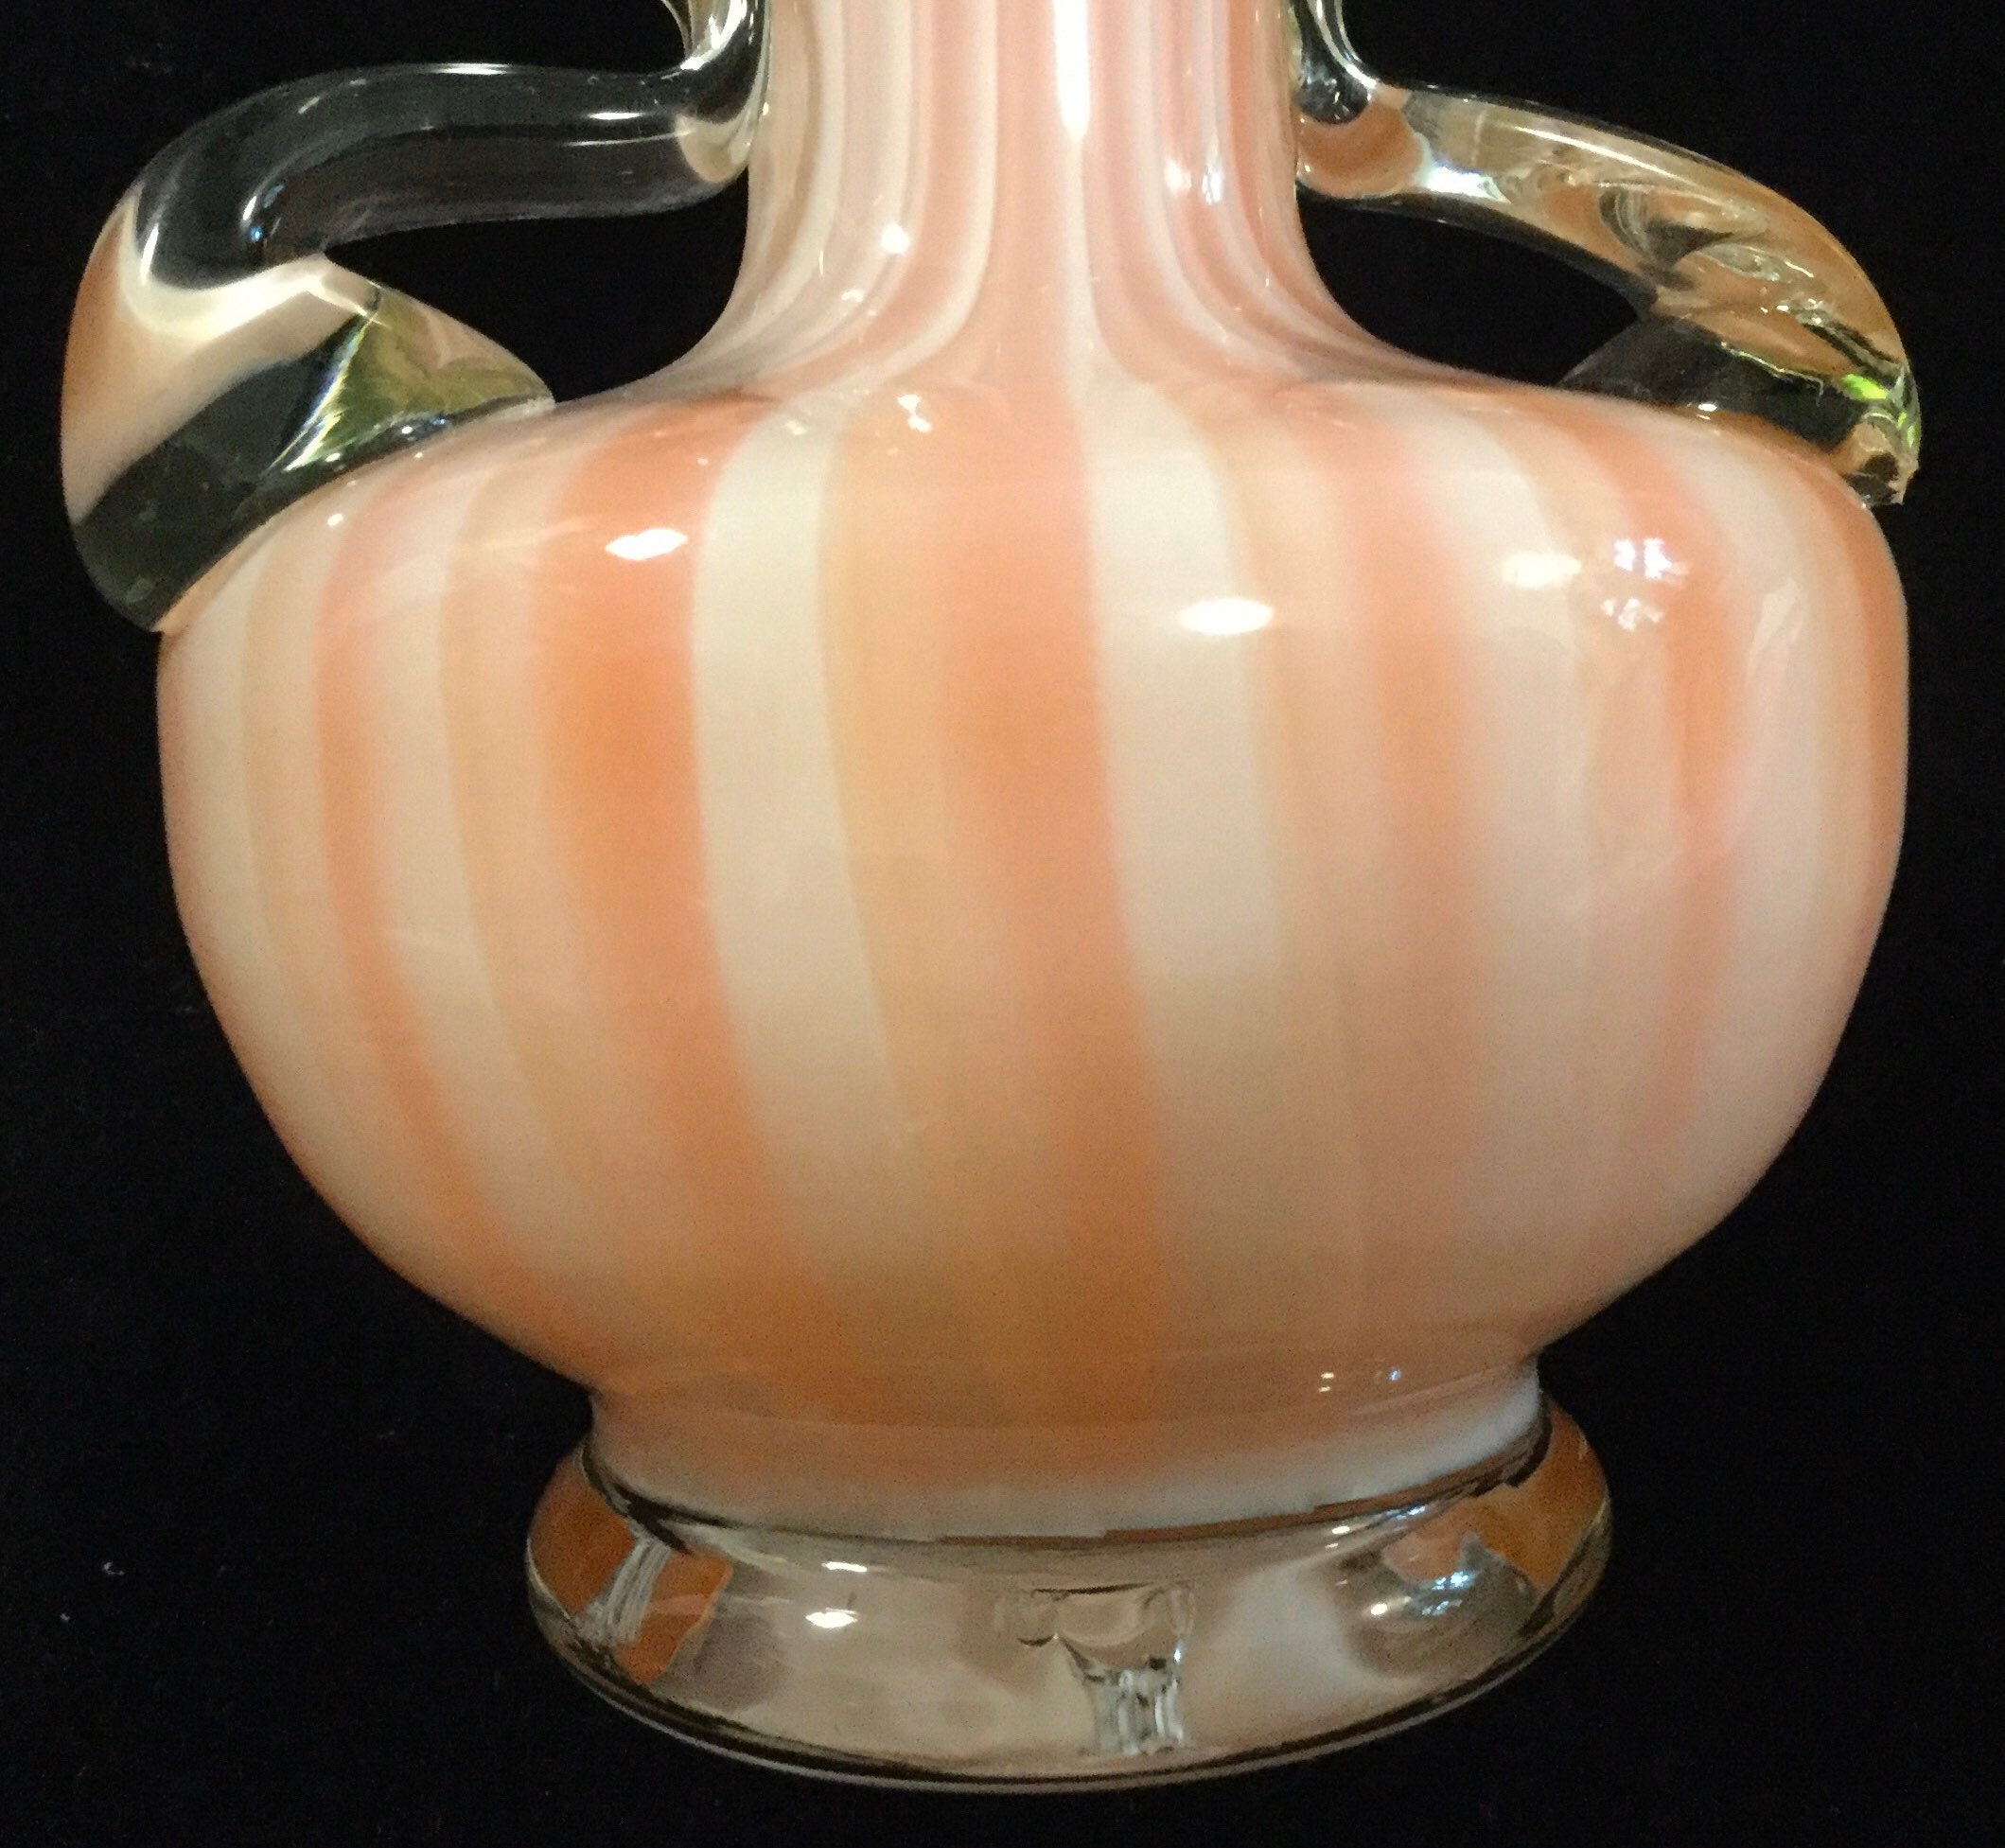 Ceramic Vase Made in Japan Vintage peach brown and white swirl vase with elephant handles